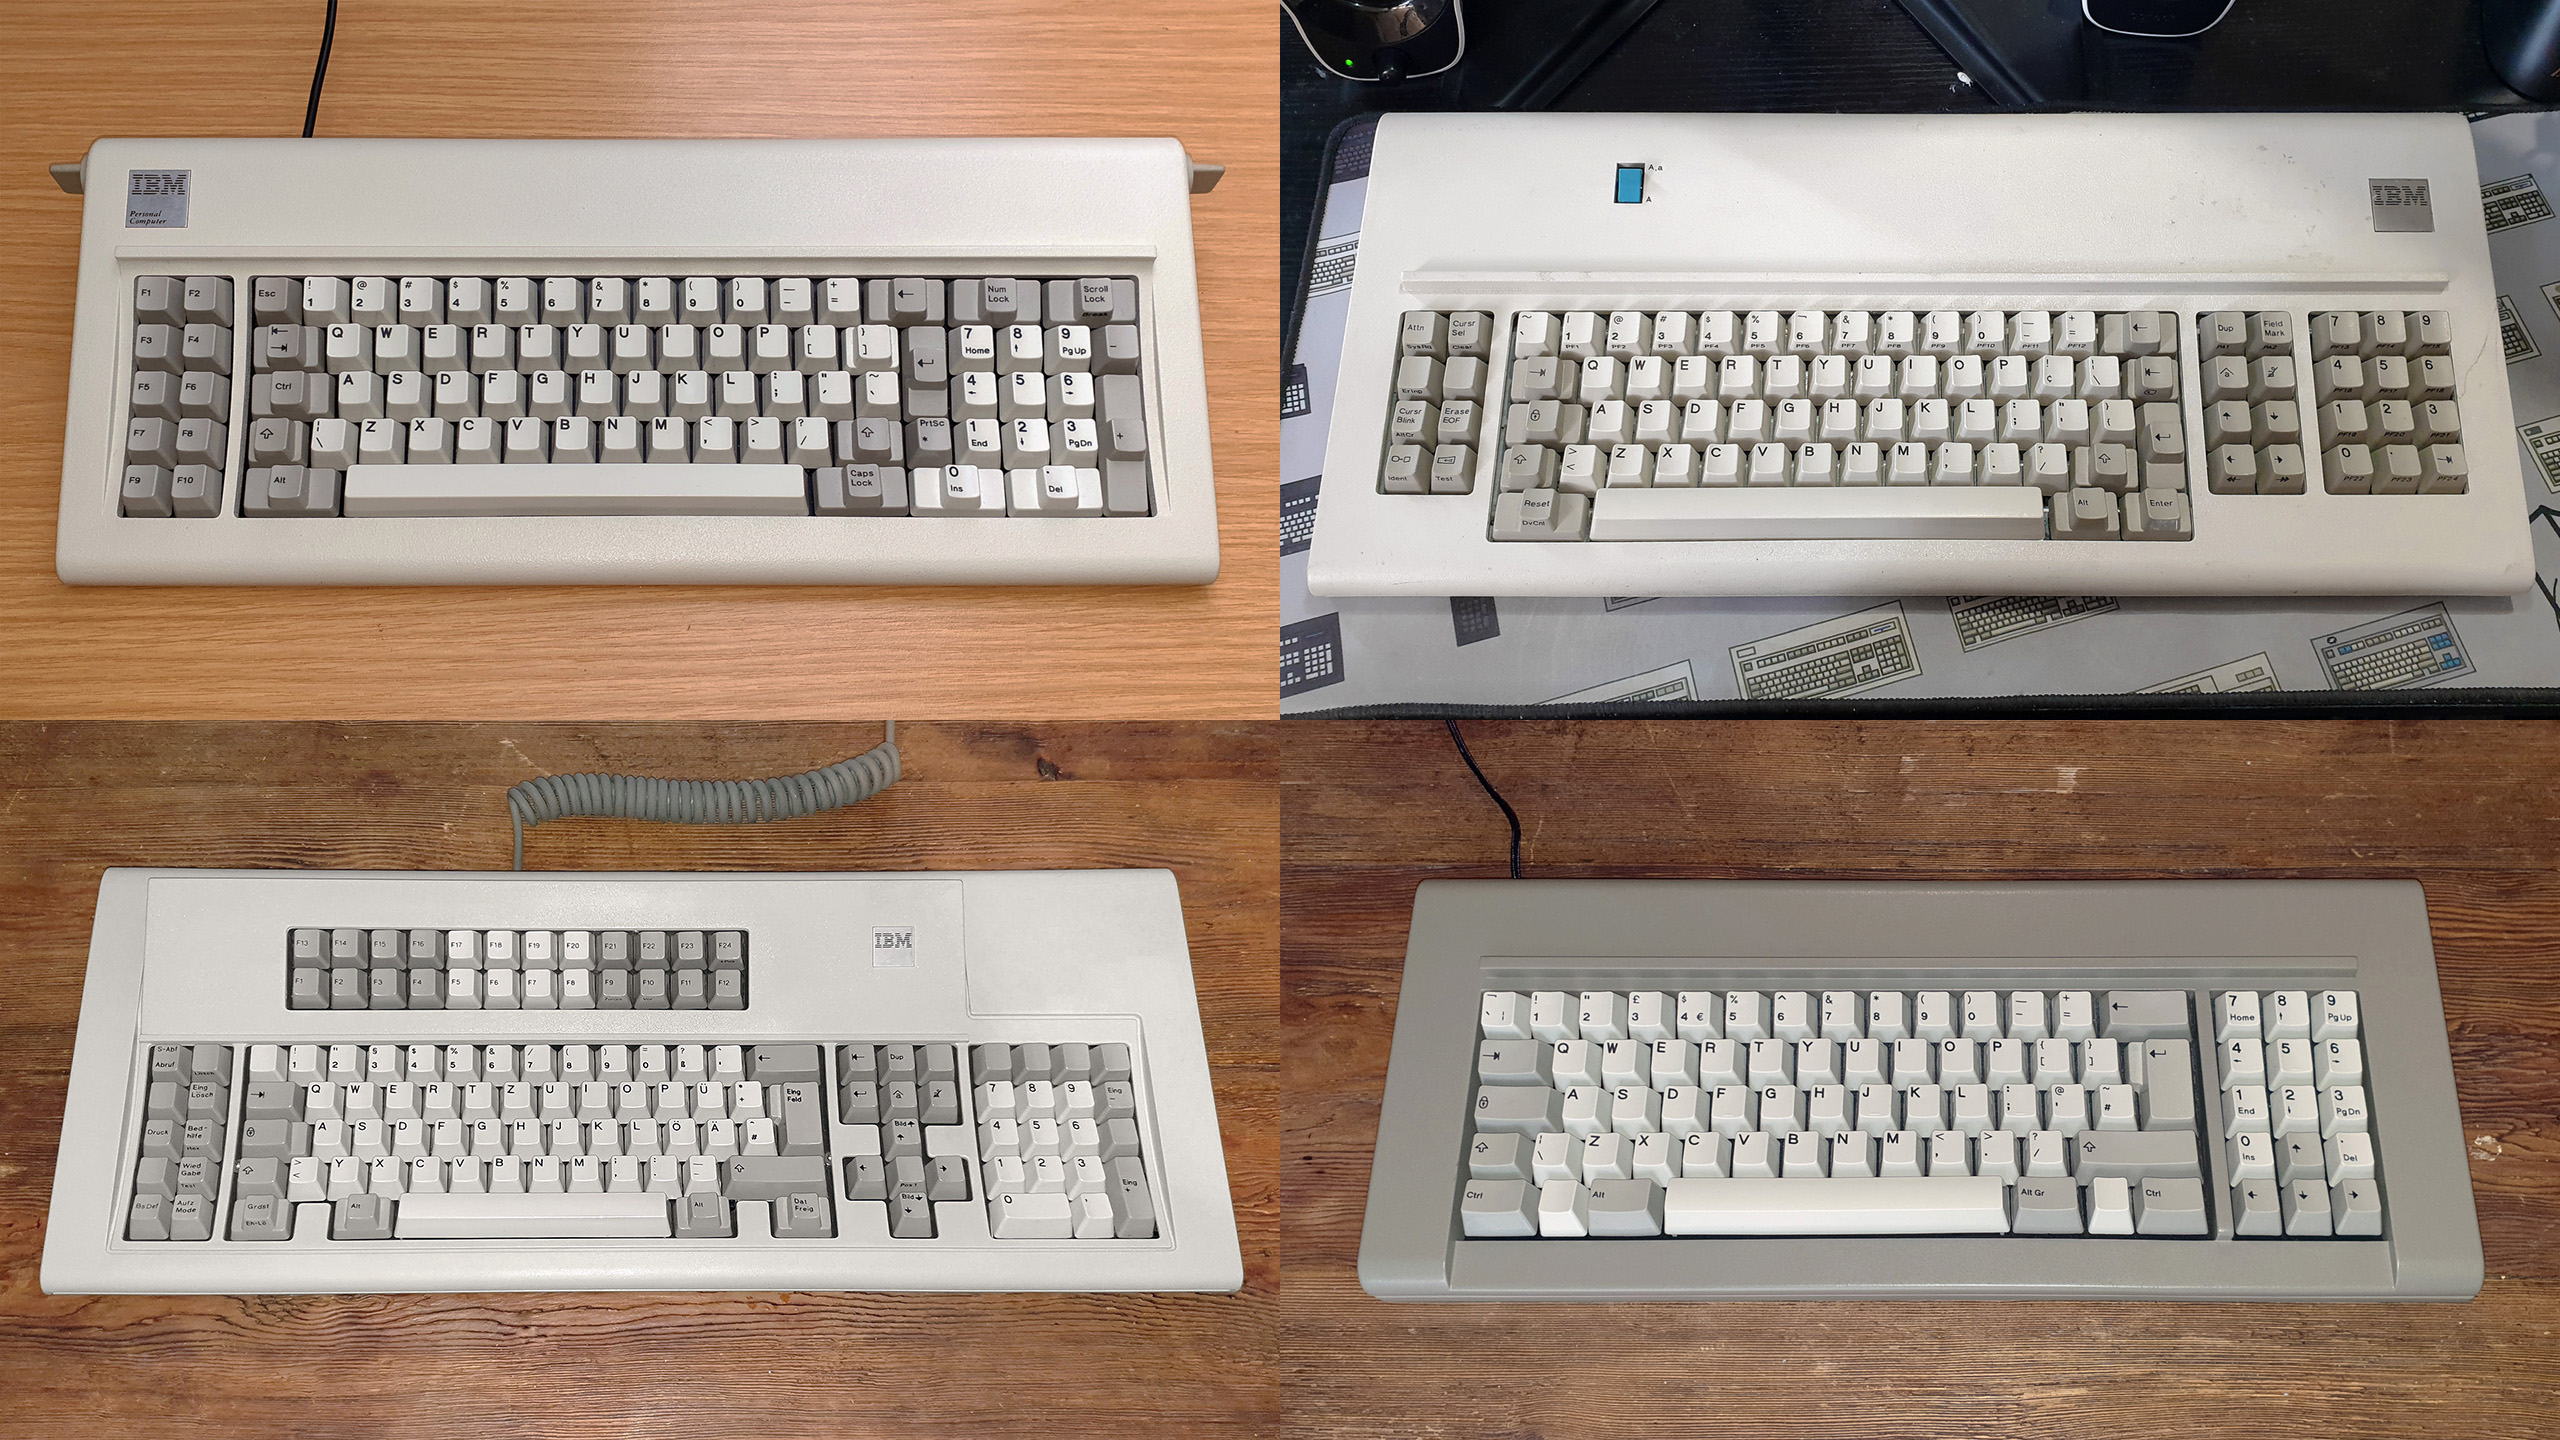 Various Model F keyboards<a class='source-link' href='/wiki?id=modelf#Sources'><sup>[ASK]</sup></a>